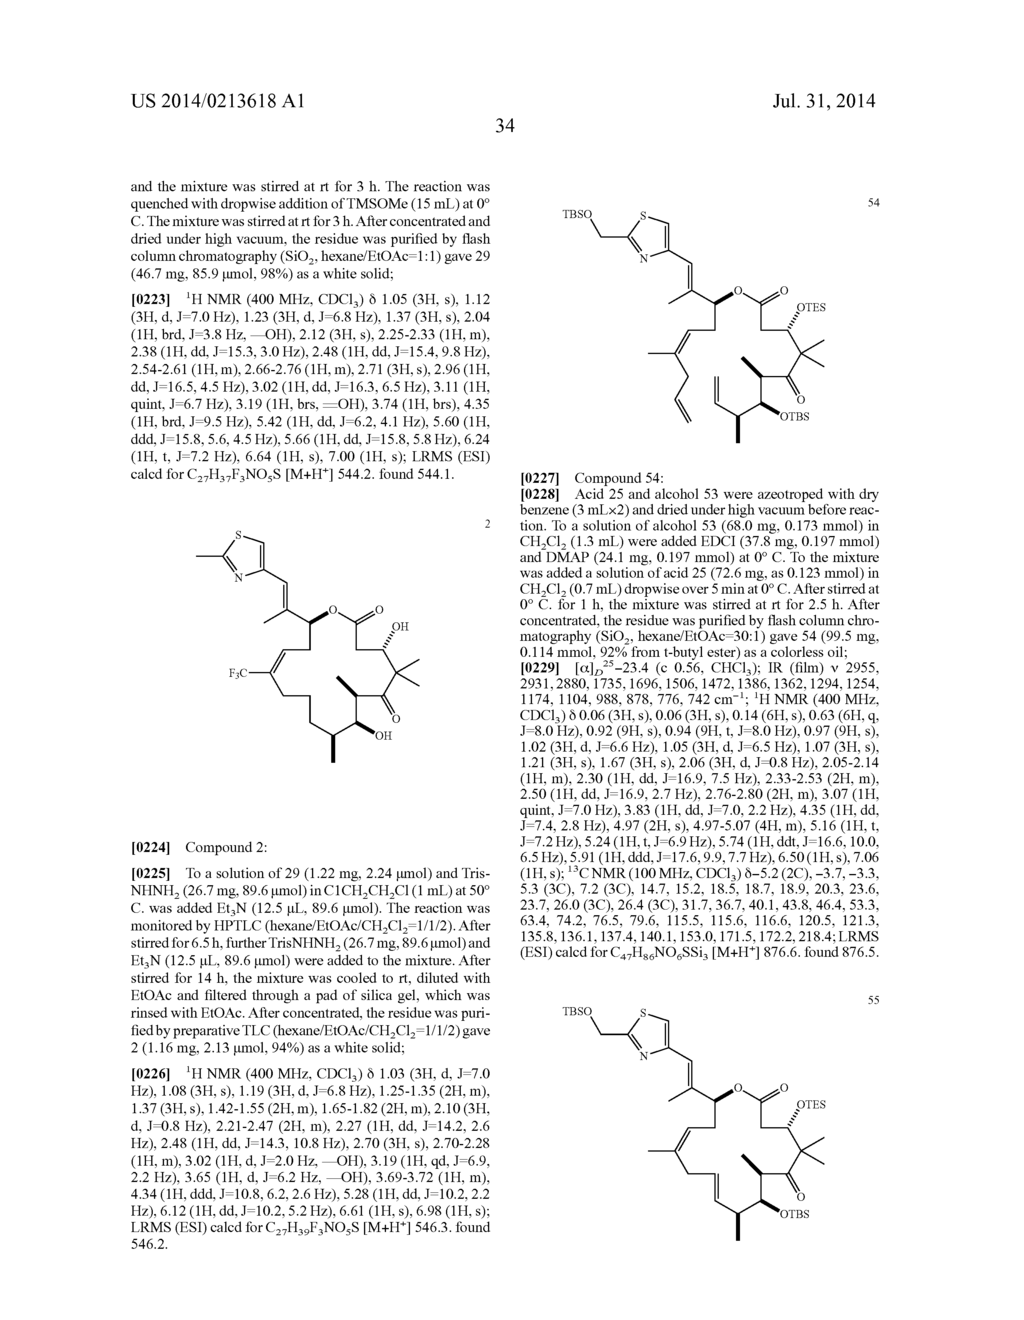 SYNTHESIS OF EPOTHILONES, INTERMEDIATES THERETO AND ANALOGUES THEREOF - diagram, schematic, and image 105